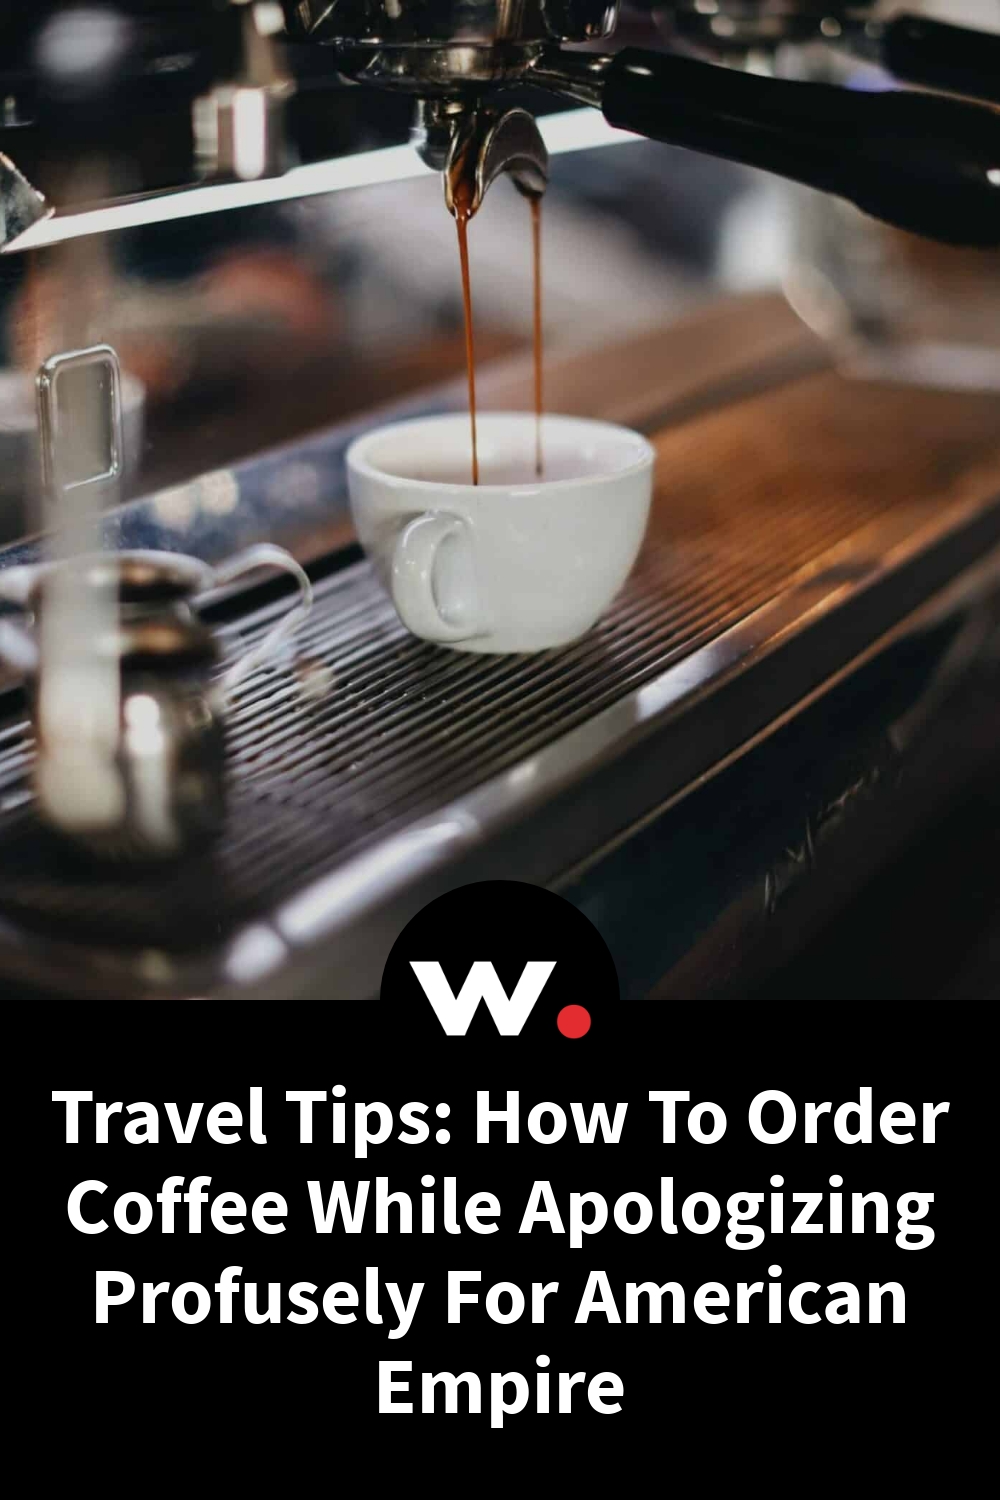 Travel Tips: How To Order Coffee While Apologizing Profusely For American Empire